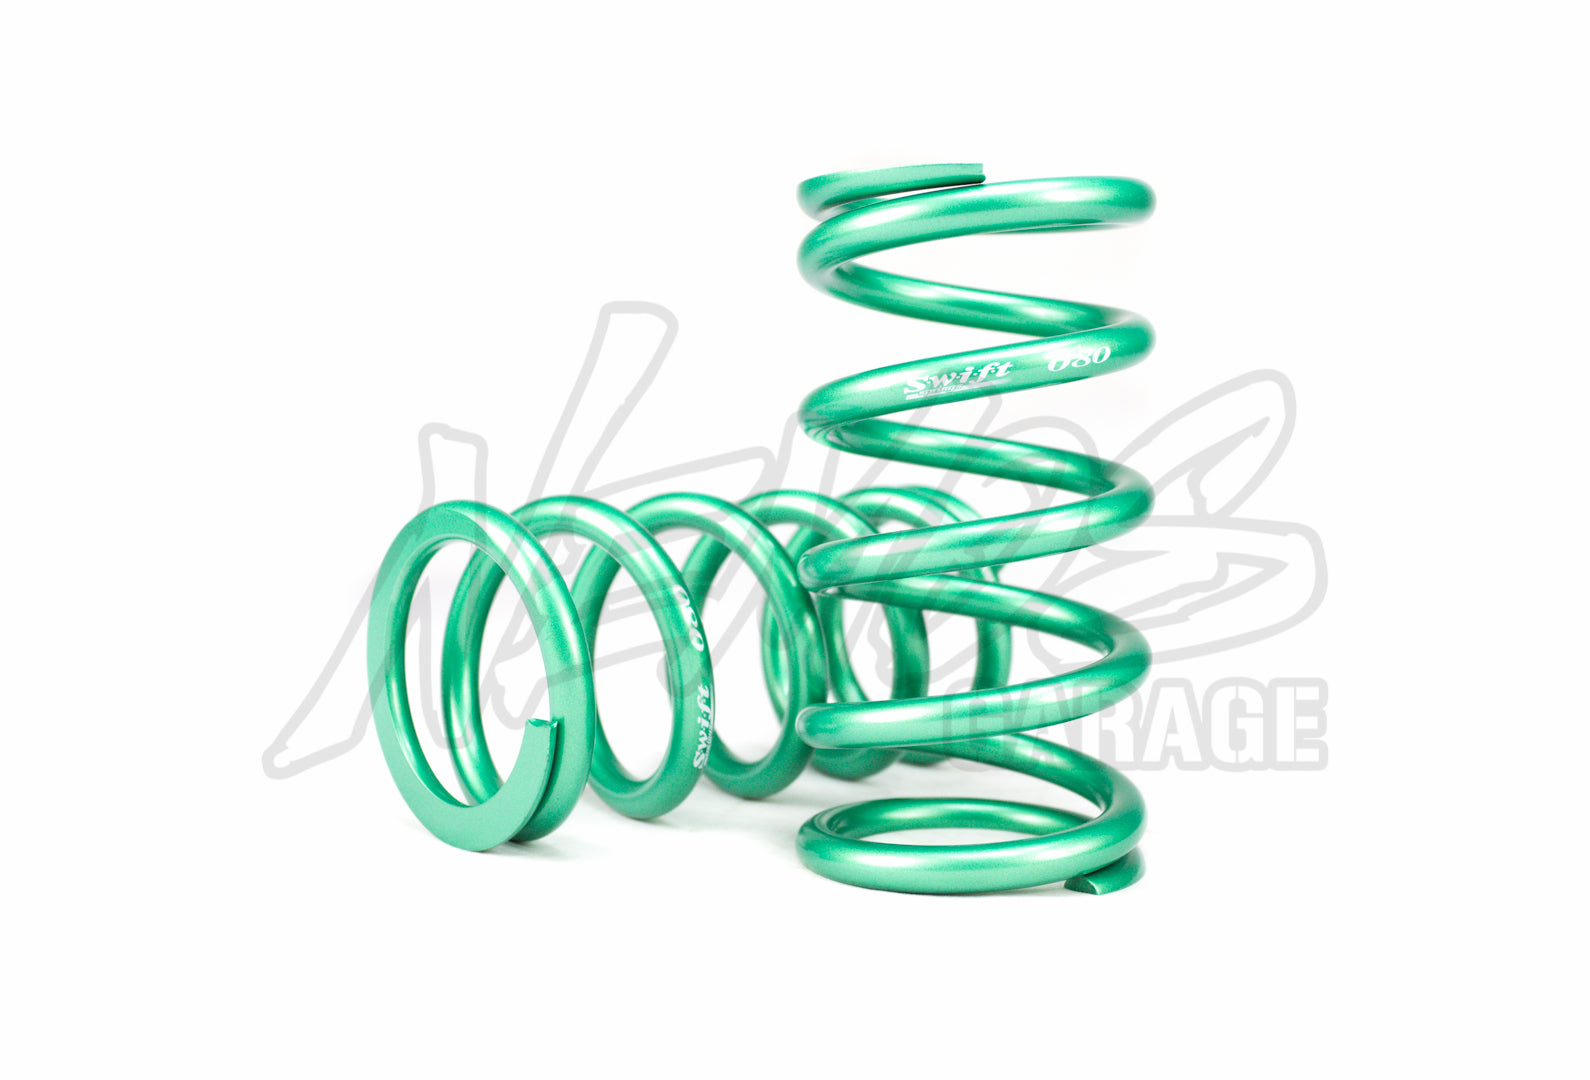 Swift Metric Coilover Springs ID 70MM (2.76") - 6" Length - Honda/Acura Applications